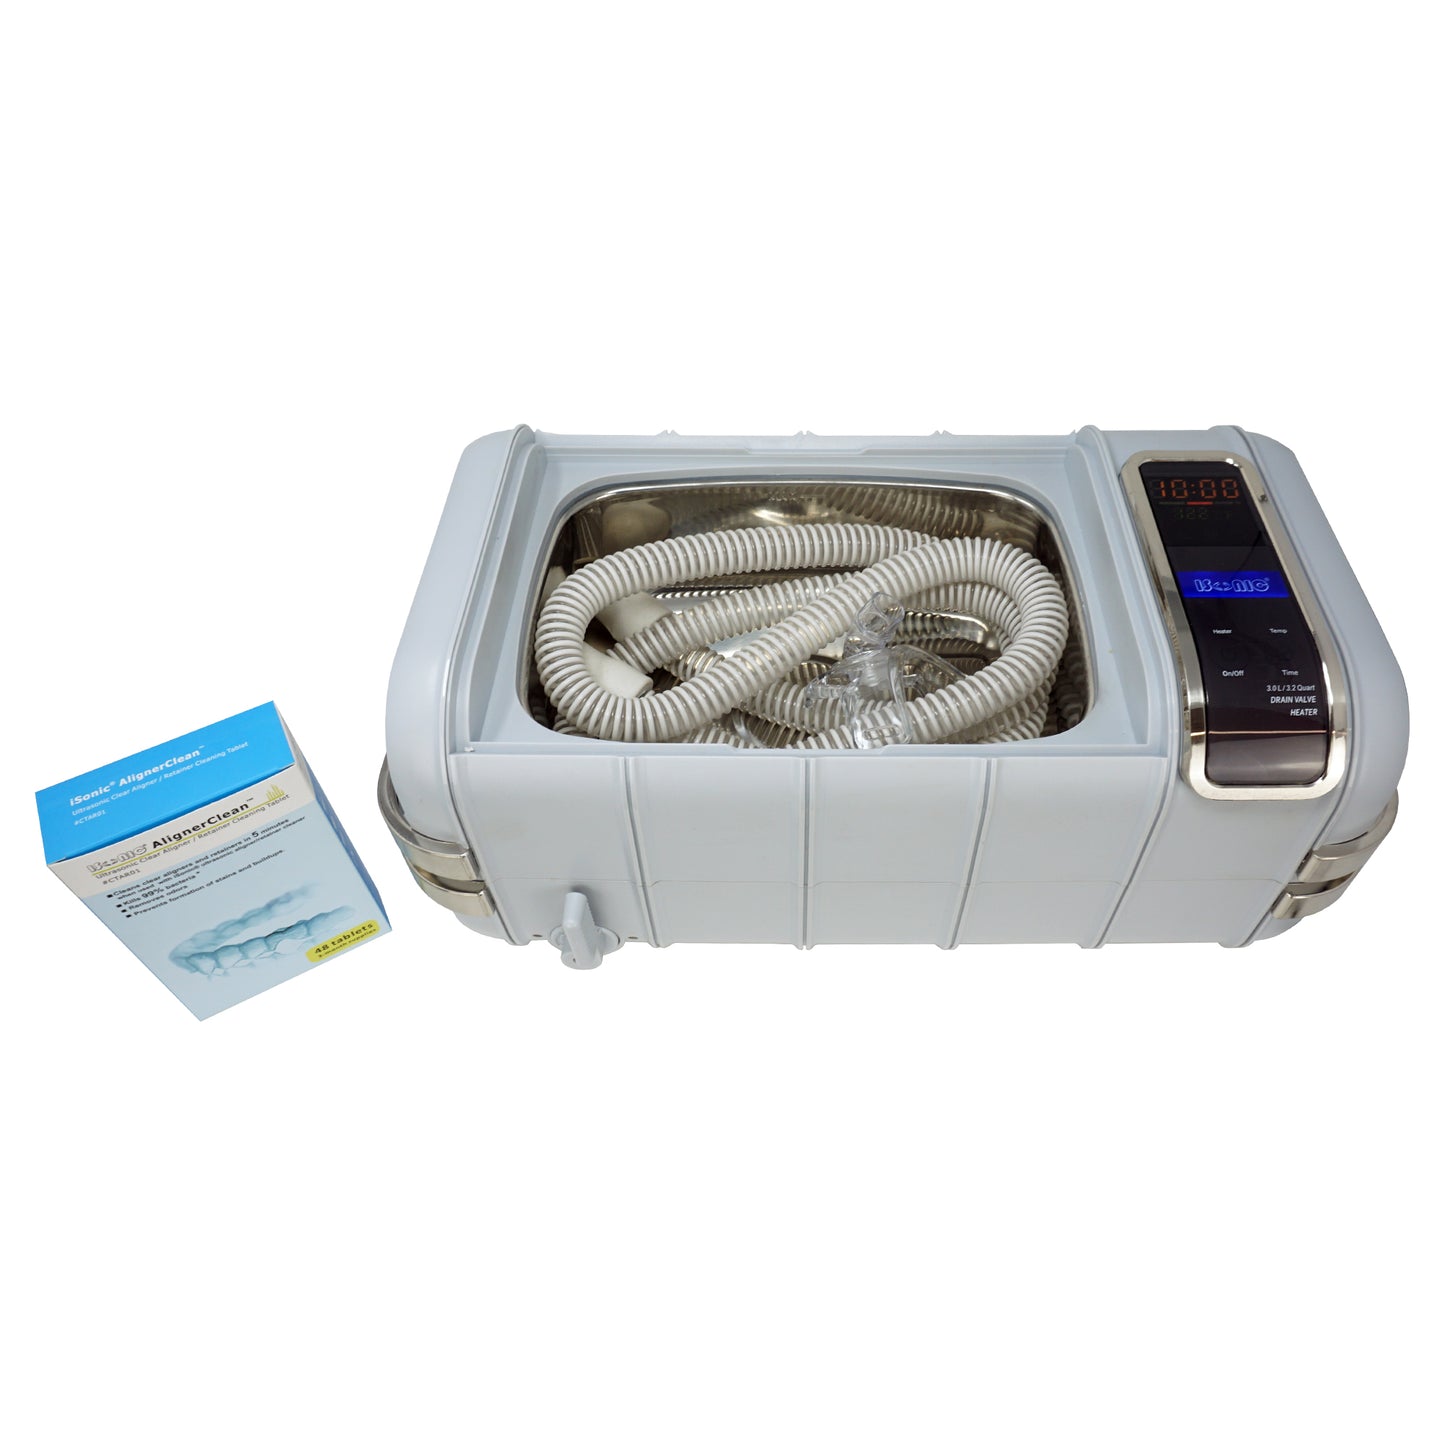 P4831-CPAP (medium, almost new) | iSonic® Ultrasonic CPAP/BiPAP Cleaner, 0.8Gal/3L, with a stainless steel weight bracket, a box of cleaning tablet, plastic basket, heater, drain, Free Shipping!